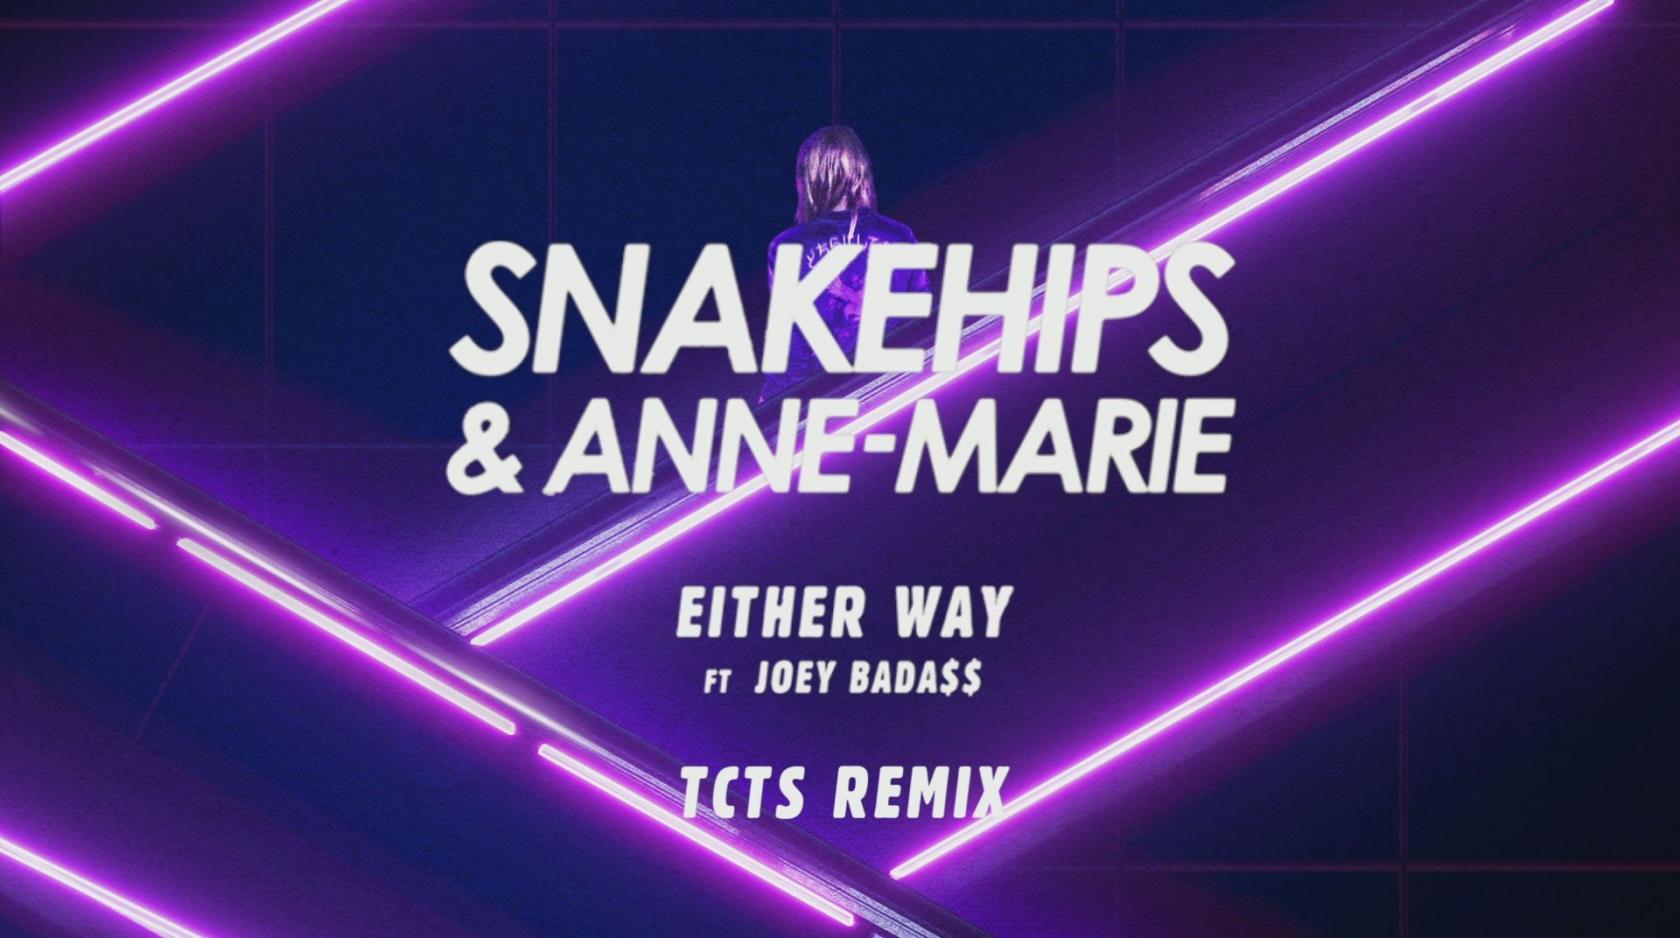 I like the way remix. Snakehips. Either way. Snakehips - sometimes. ABC (the Wild Remix) by Gayle.